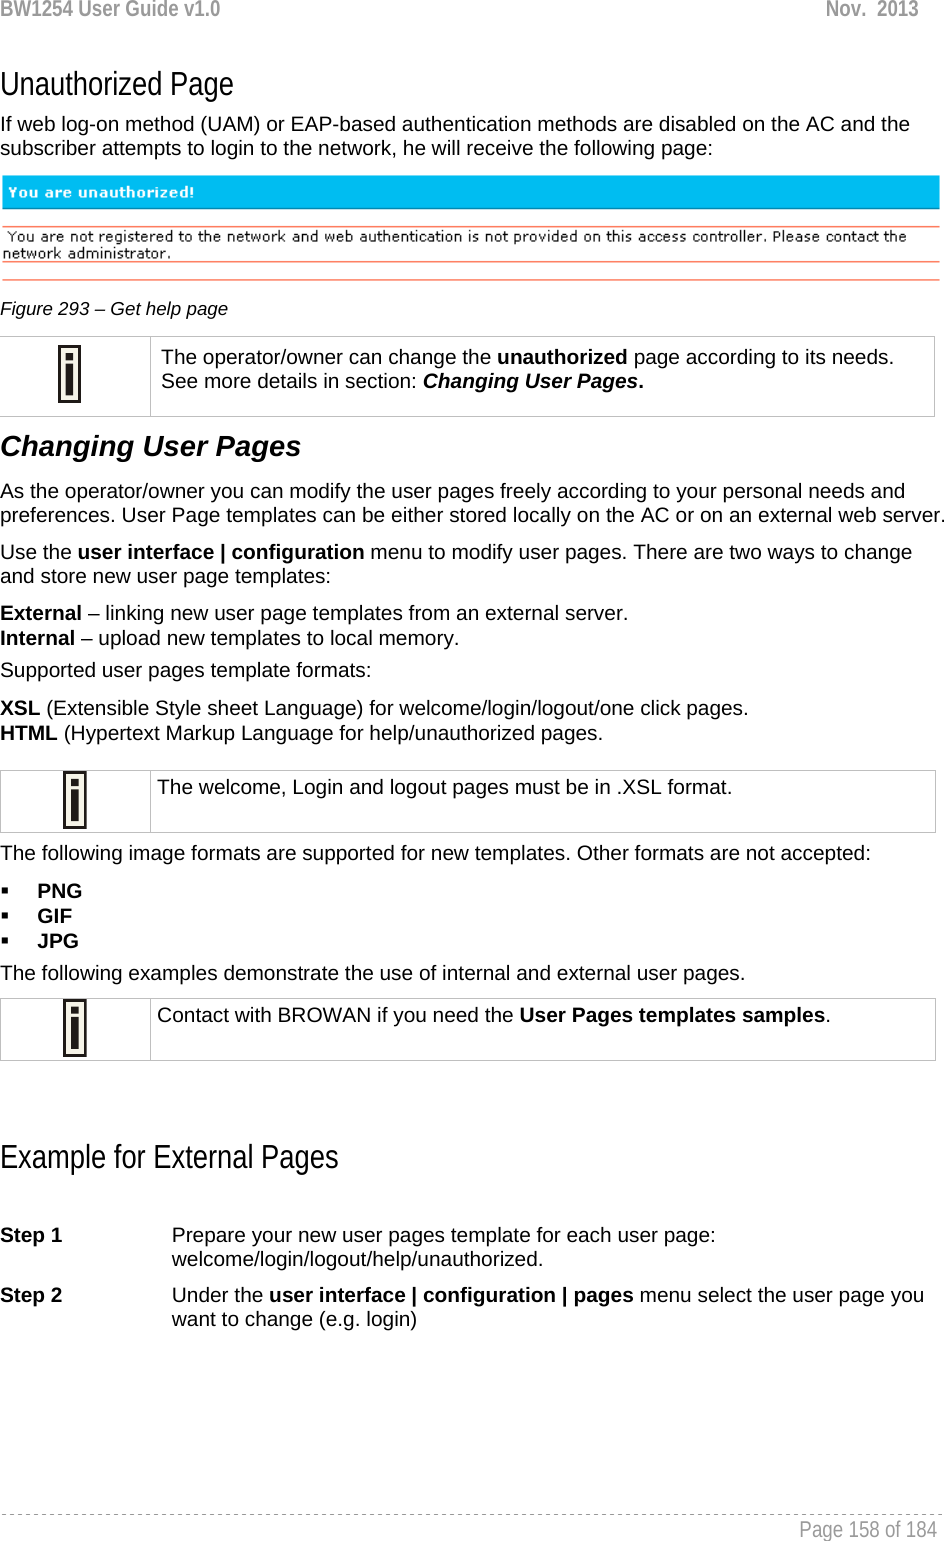 BW1254 User Guide v1.0  Nov.  2013     Page 158 of 184   Unauthorized Page If web log-on method (UAM) or EAP-based authentication methods are disabled on the AC and the subscriber attempts to login to the network, he will receive the following page:   Figure 293 – Get help page  The operator/owner can change the unauthorized page according to its needs. See more details in section: Changing User Pages. Changing User Pages As the operator/owner you can modify the user pages freely according to your personal needs and preferences. User Page templates can be either stored locally on the AC or on an external web server.  Use the user interface | configuration menu to modify user pages. There are two ways to change and store new user page templates: External – linking new user page templates from an external server. Internal – upload new templates to local memory. Supported user pages template formats: XSL (Extensible Style sheet Language) for welcome/login/logout/one click pages. HTML (Hypertext Markup Language for help/unauthorized pages.   The welcome, Login and logout pages must be in .XSL format. The following image formats are supported for new templates. Other formats are not accepted:  PNG  GIF  JPG  The following examples demonstrate the use of internal and external user pages.  Contact with BROWAN if you need the User Pages templates samples.   Example for External Pages  Step 1  Prepare your new user pages template for each user page: welcome/login/logout/help/unauthorized.  Step 2  Under the user interface | configuration | pages menu select the user page you want to change (e.g. login) 